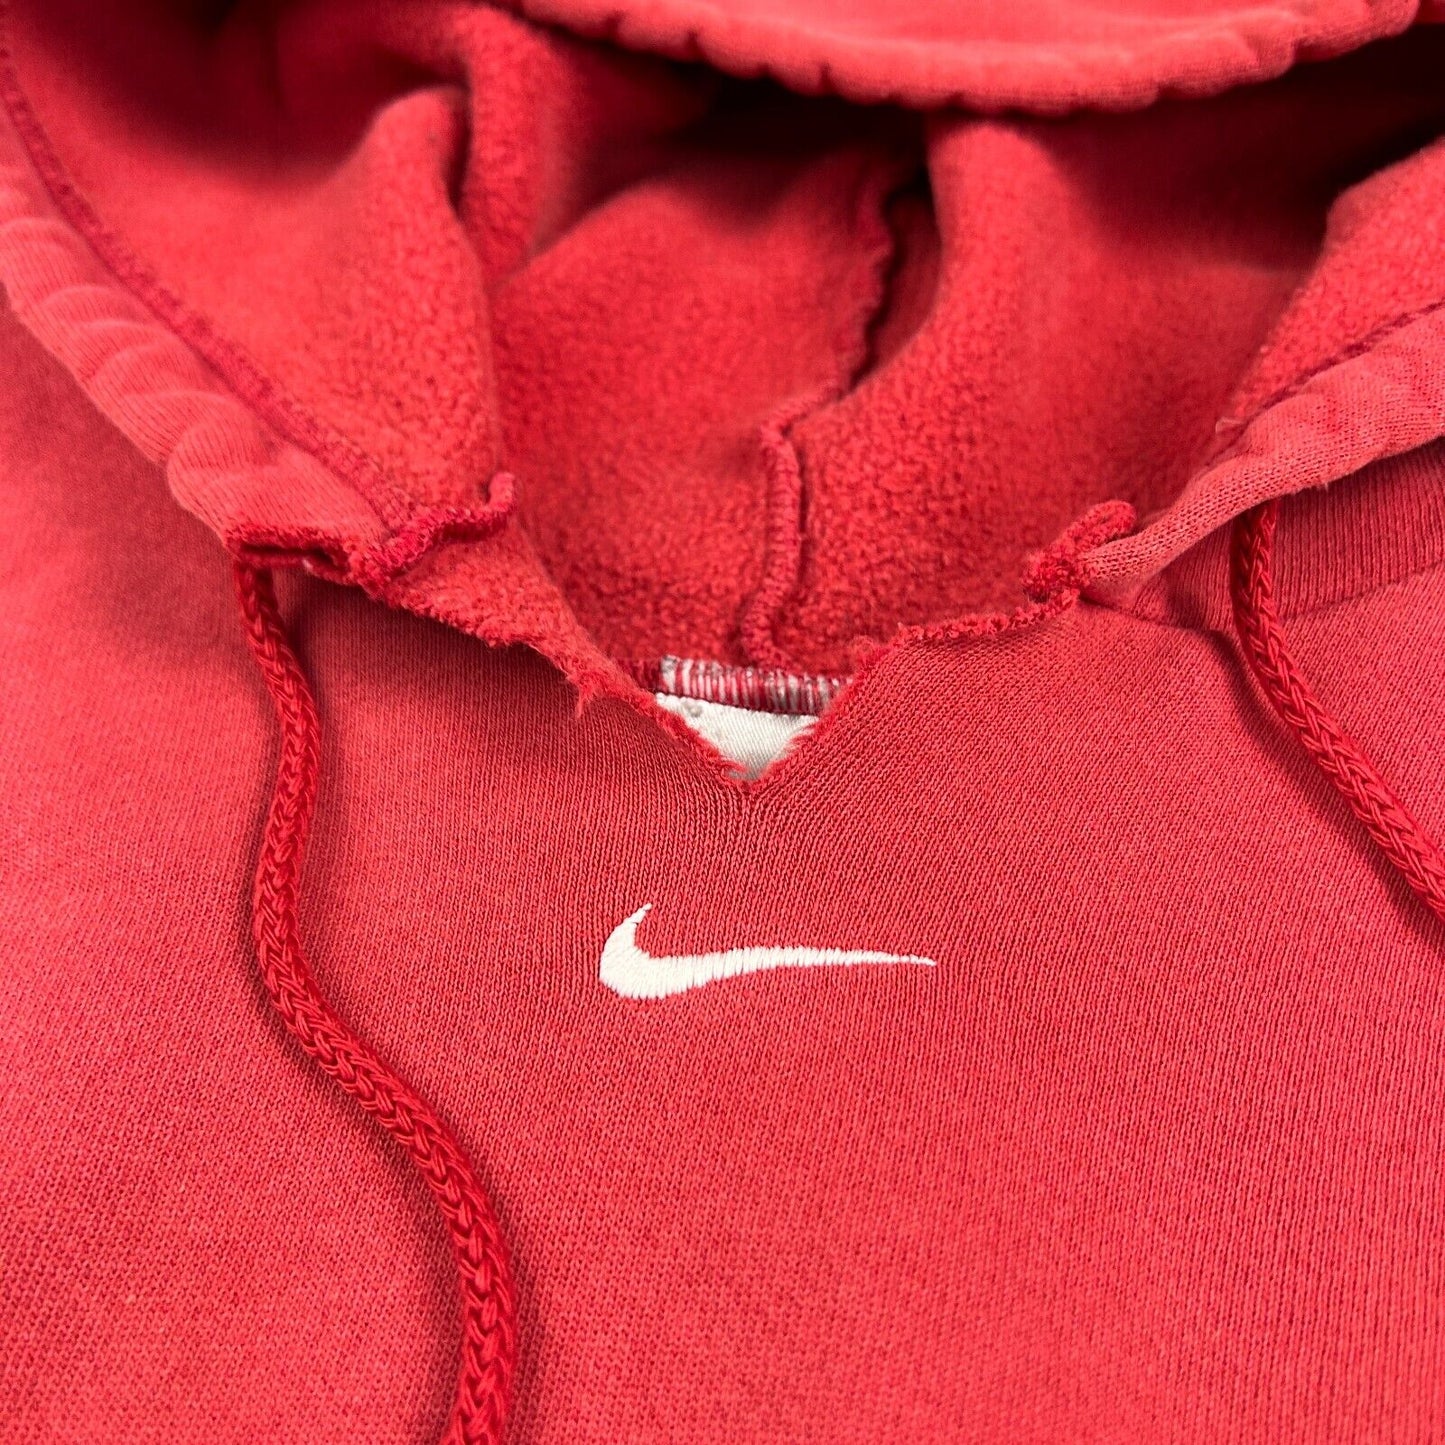 VINTAGE 90s | NIKE Mid Swoosh Faded Red Hoodie Sweater sz XL Adult